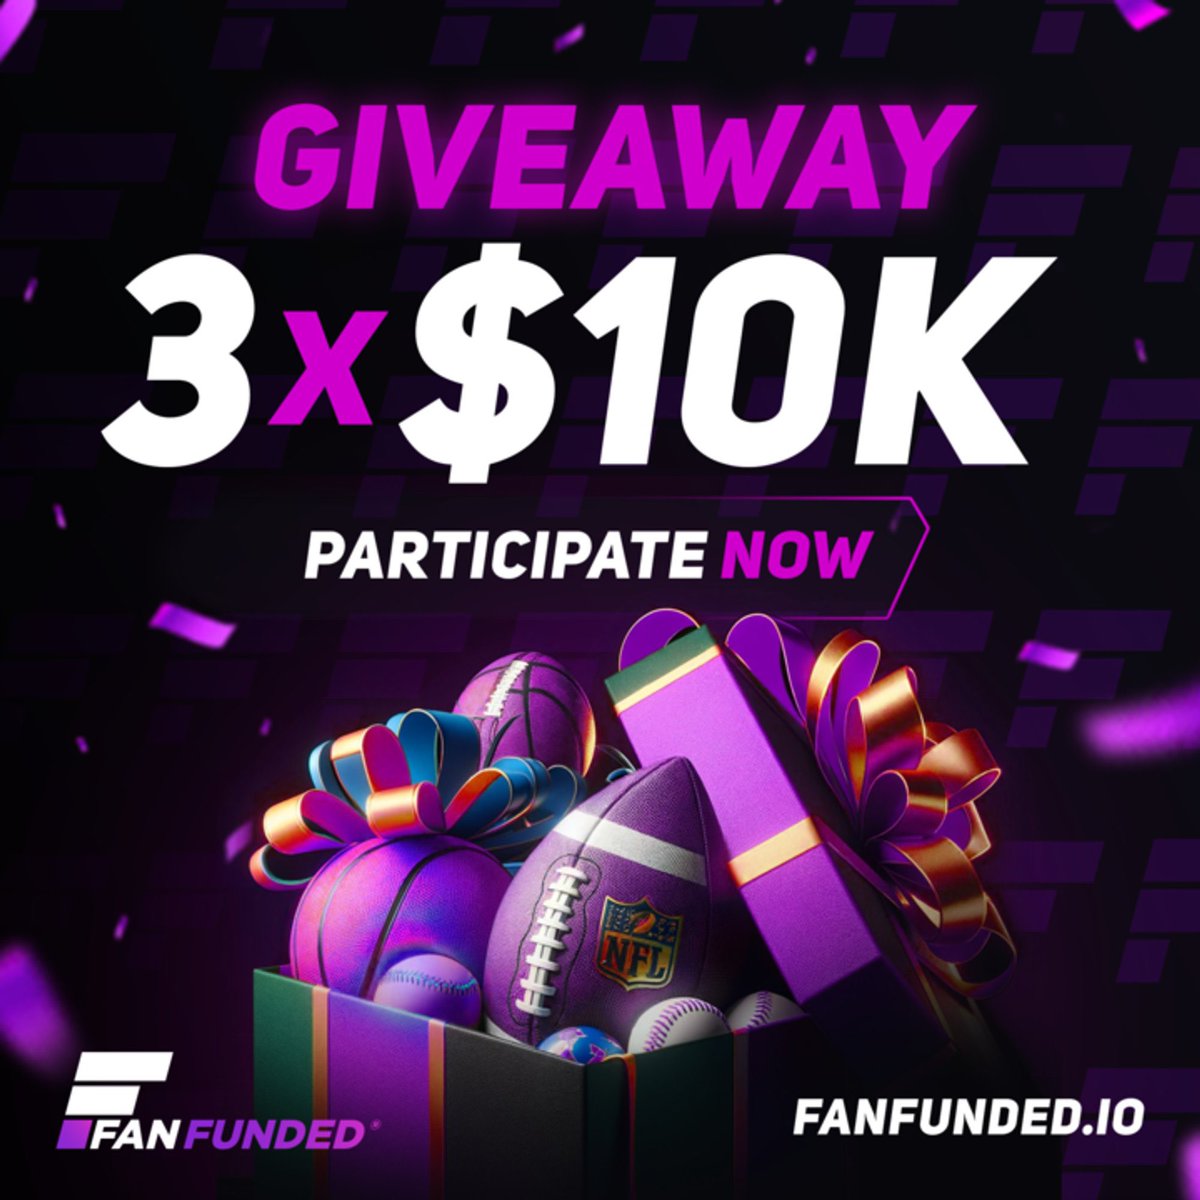 🎁Giveaway 10K X3 accounts🎁 Rules to enter Must follow 👇 1. Follow @fanfundedclub @Faruq484 @The_General_Fx 2. Like and repost 3. Tag 3 pickers Also follow @ICT_WisdomFx @Icrafts_man @naantifx Winners will be announce using Twitter picker in the next 72 hours